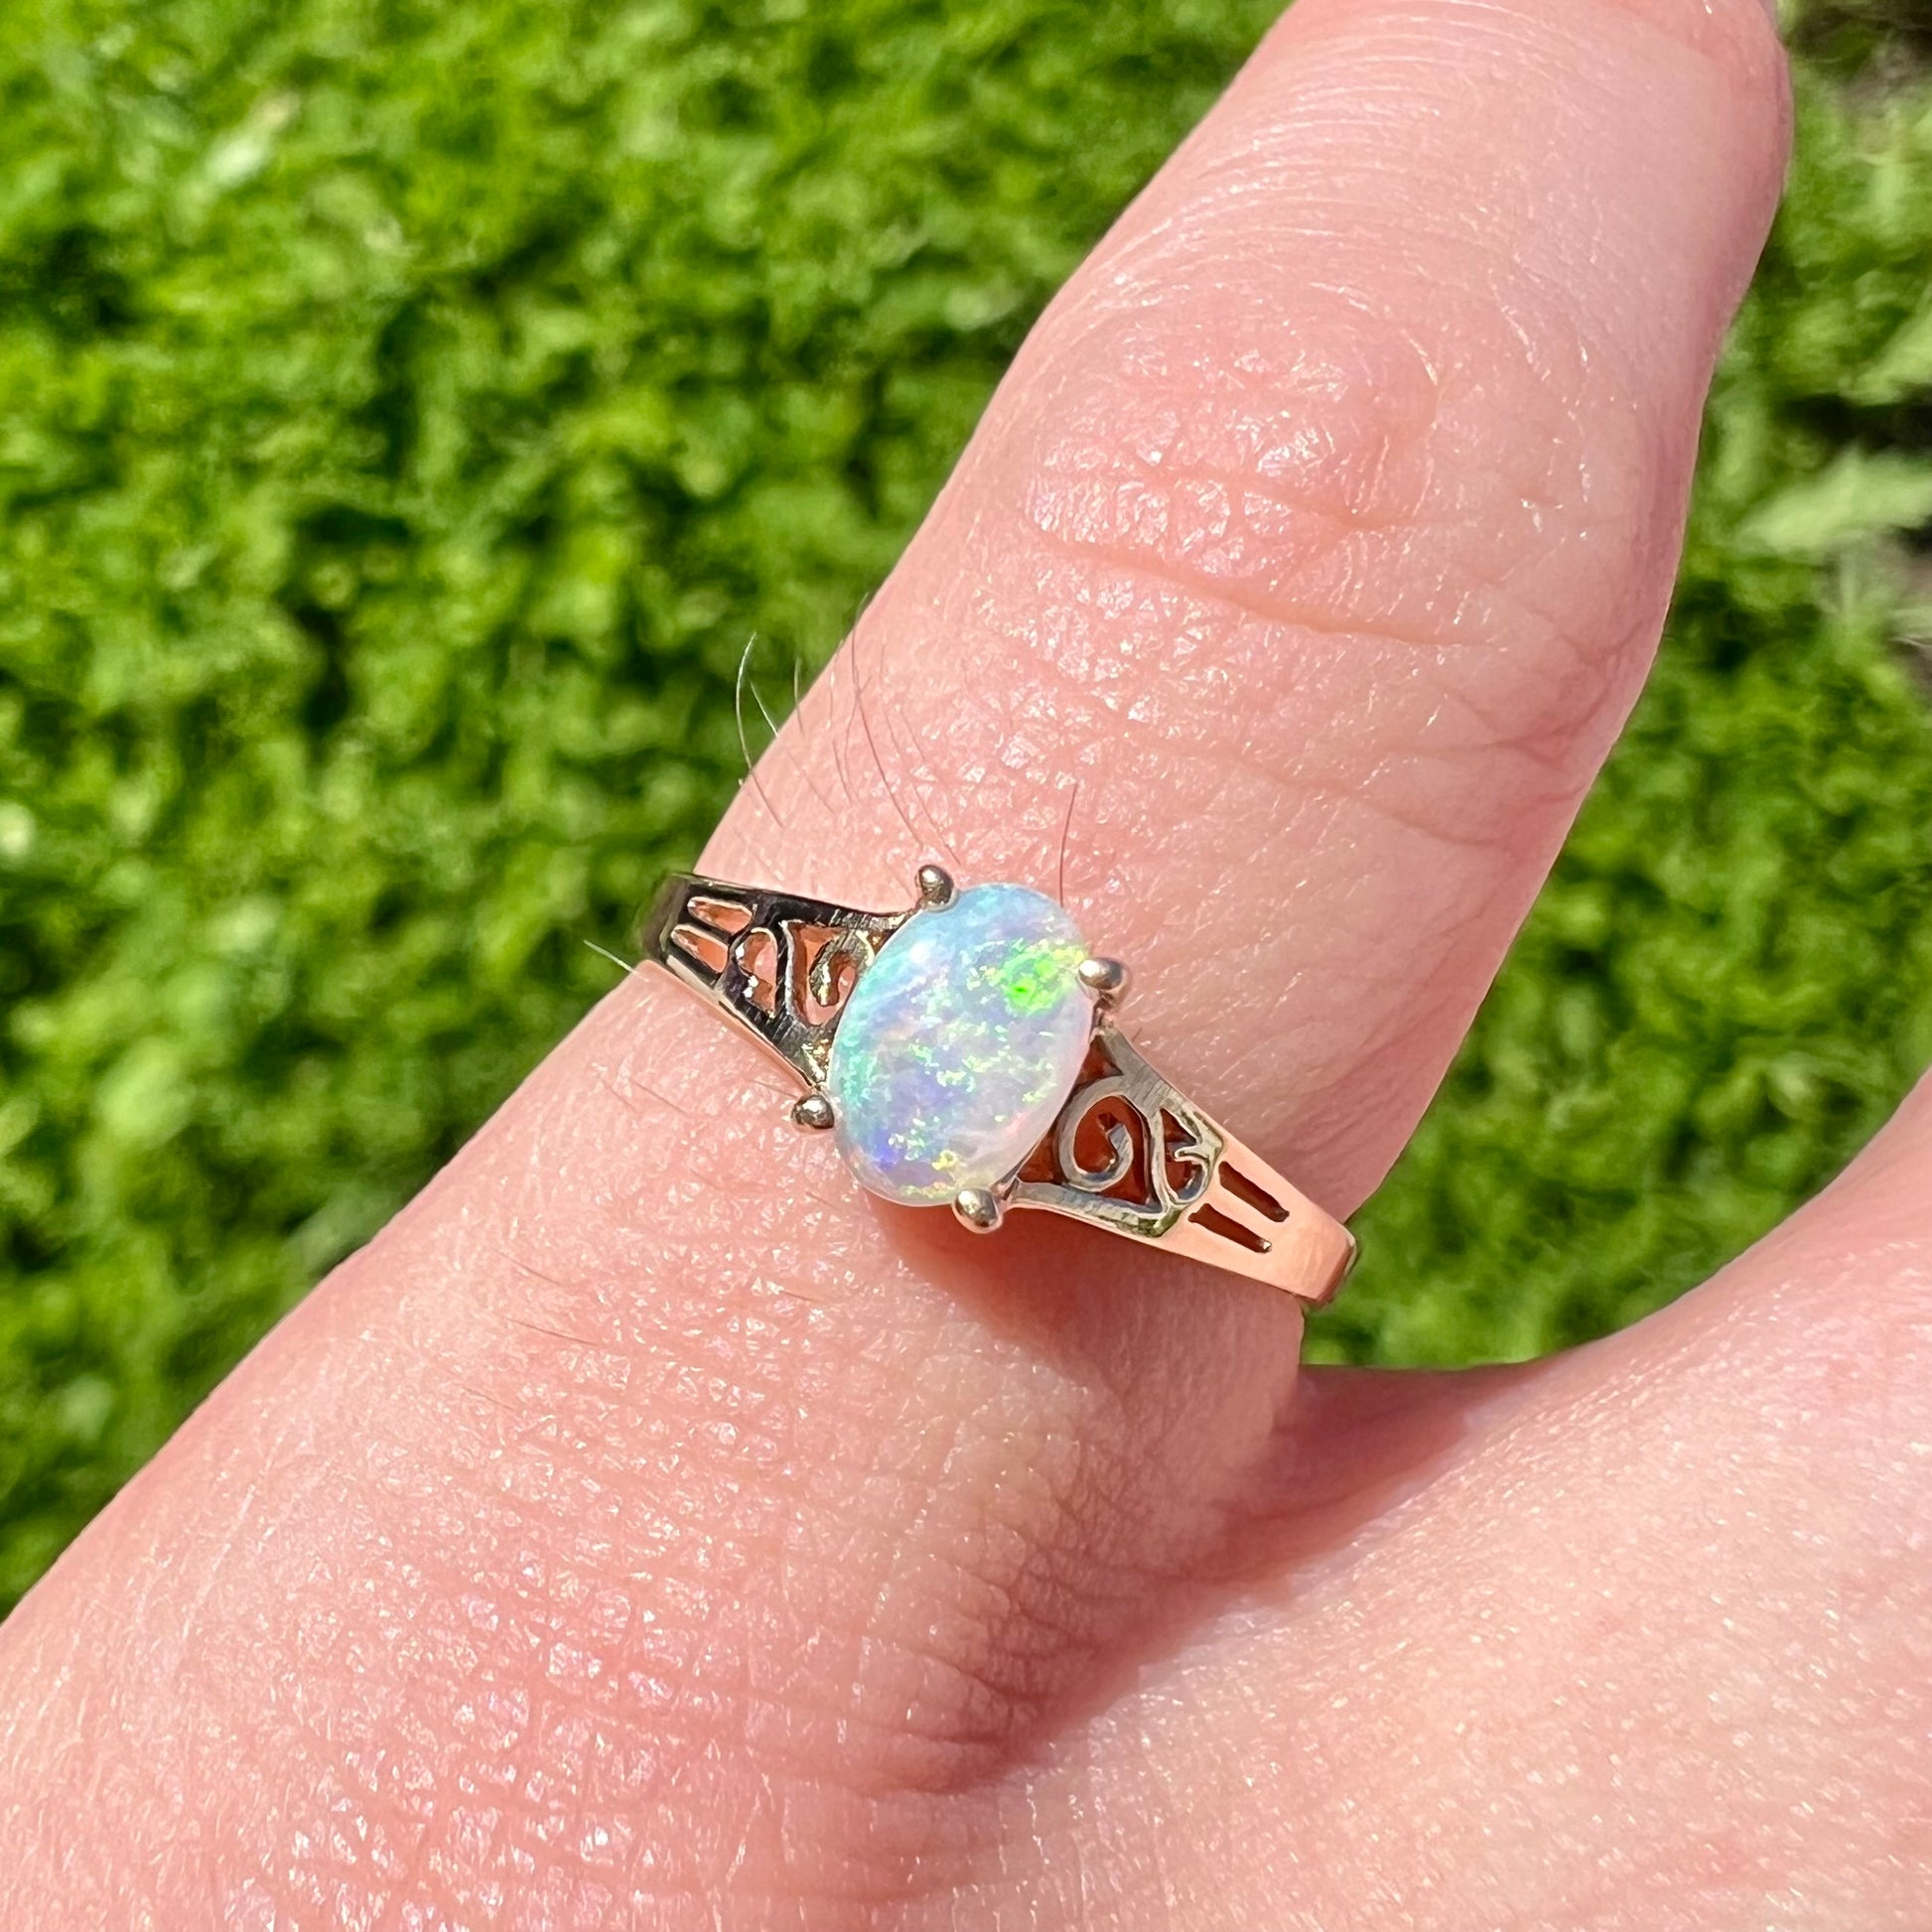 A ladies' natural opal in gold filigree ring.  The opal shines with colors of green and blue.